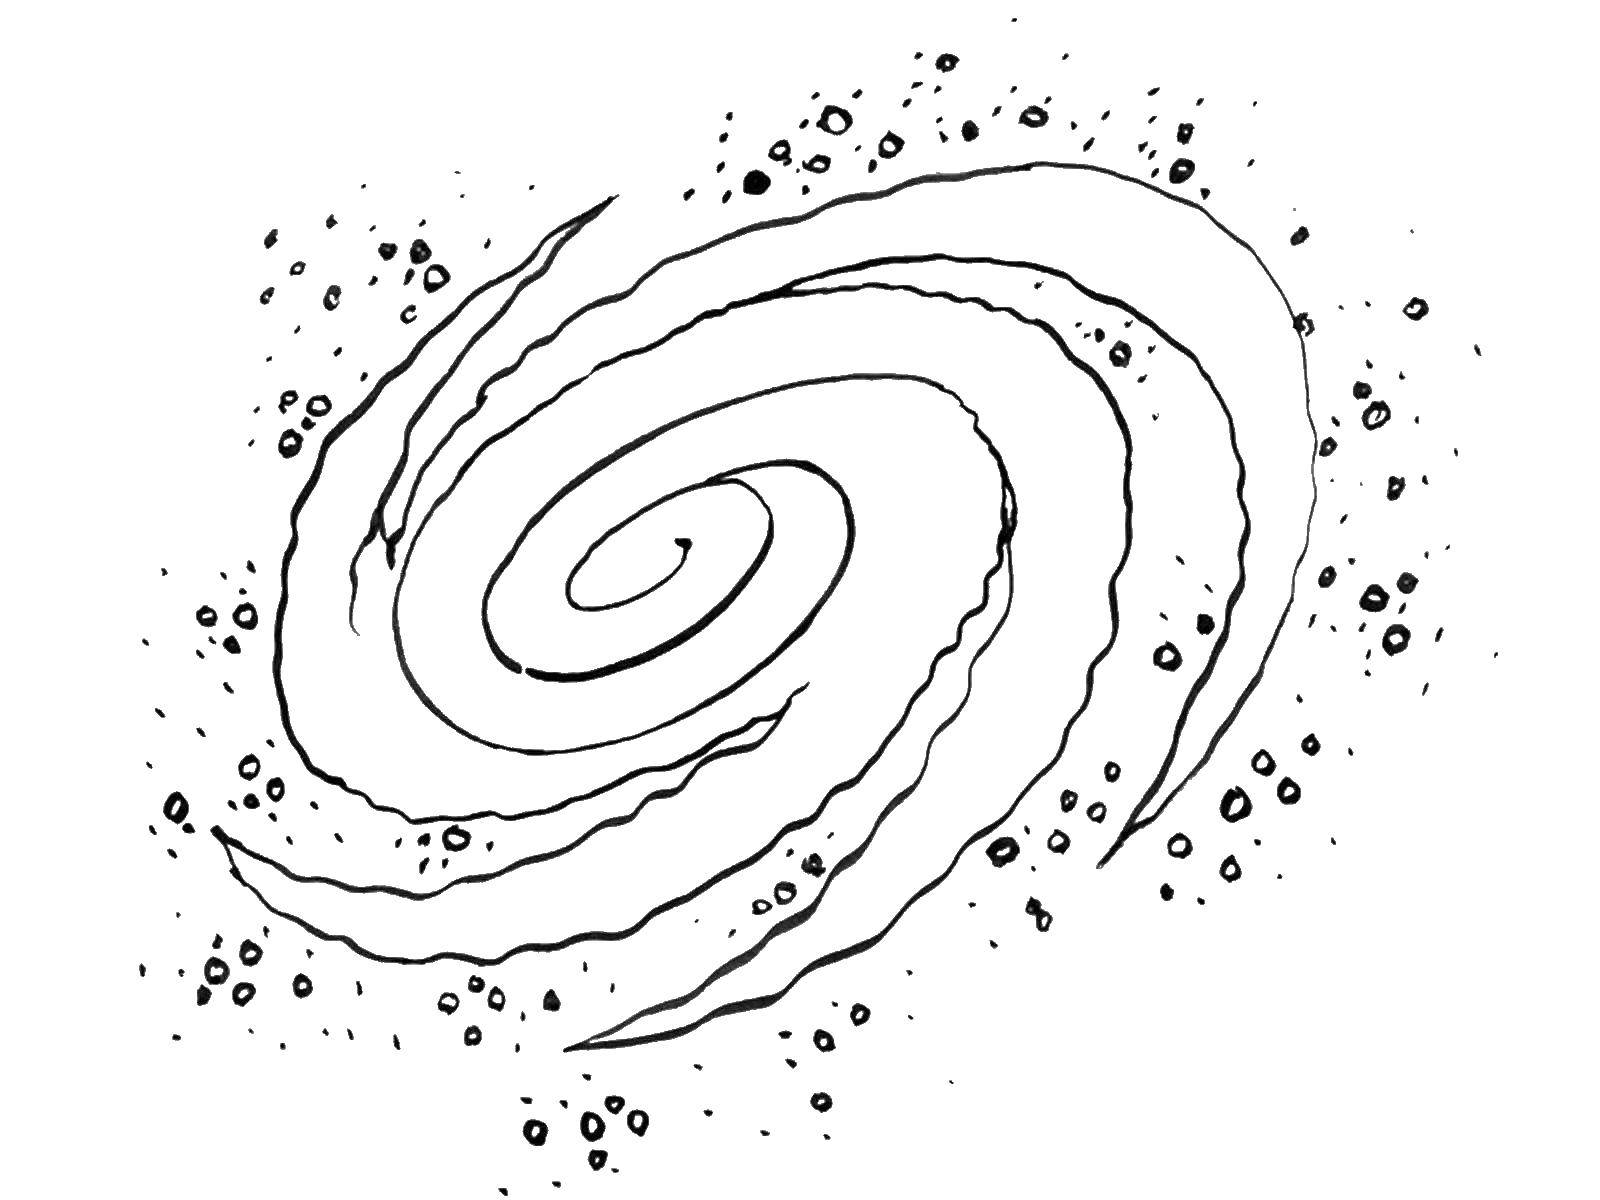 Coloring Black hole. Category space. Tags:  space, stars, black hole.